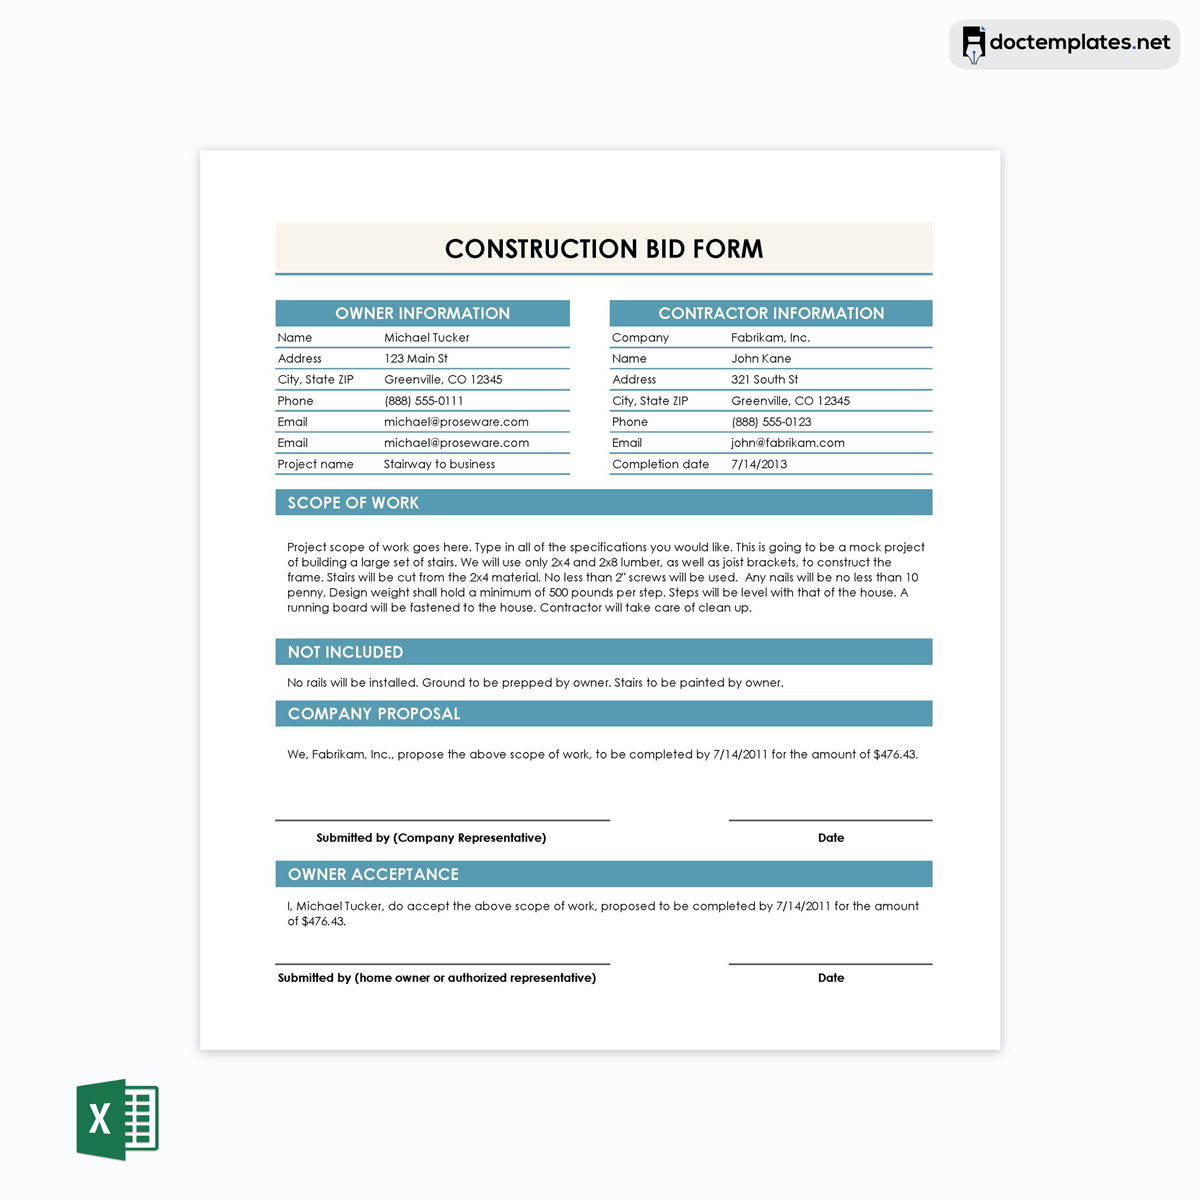 construction proposal template excel